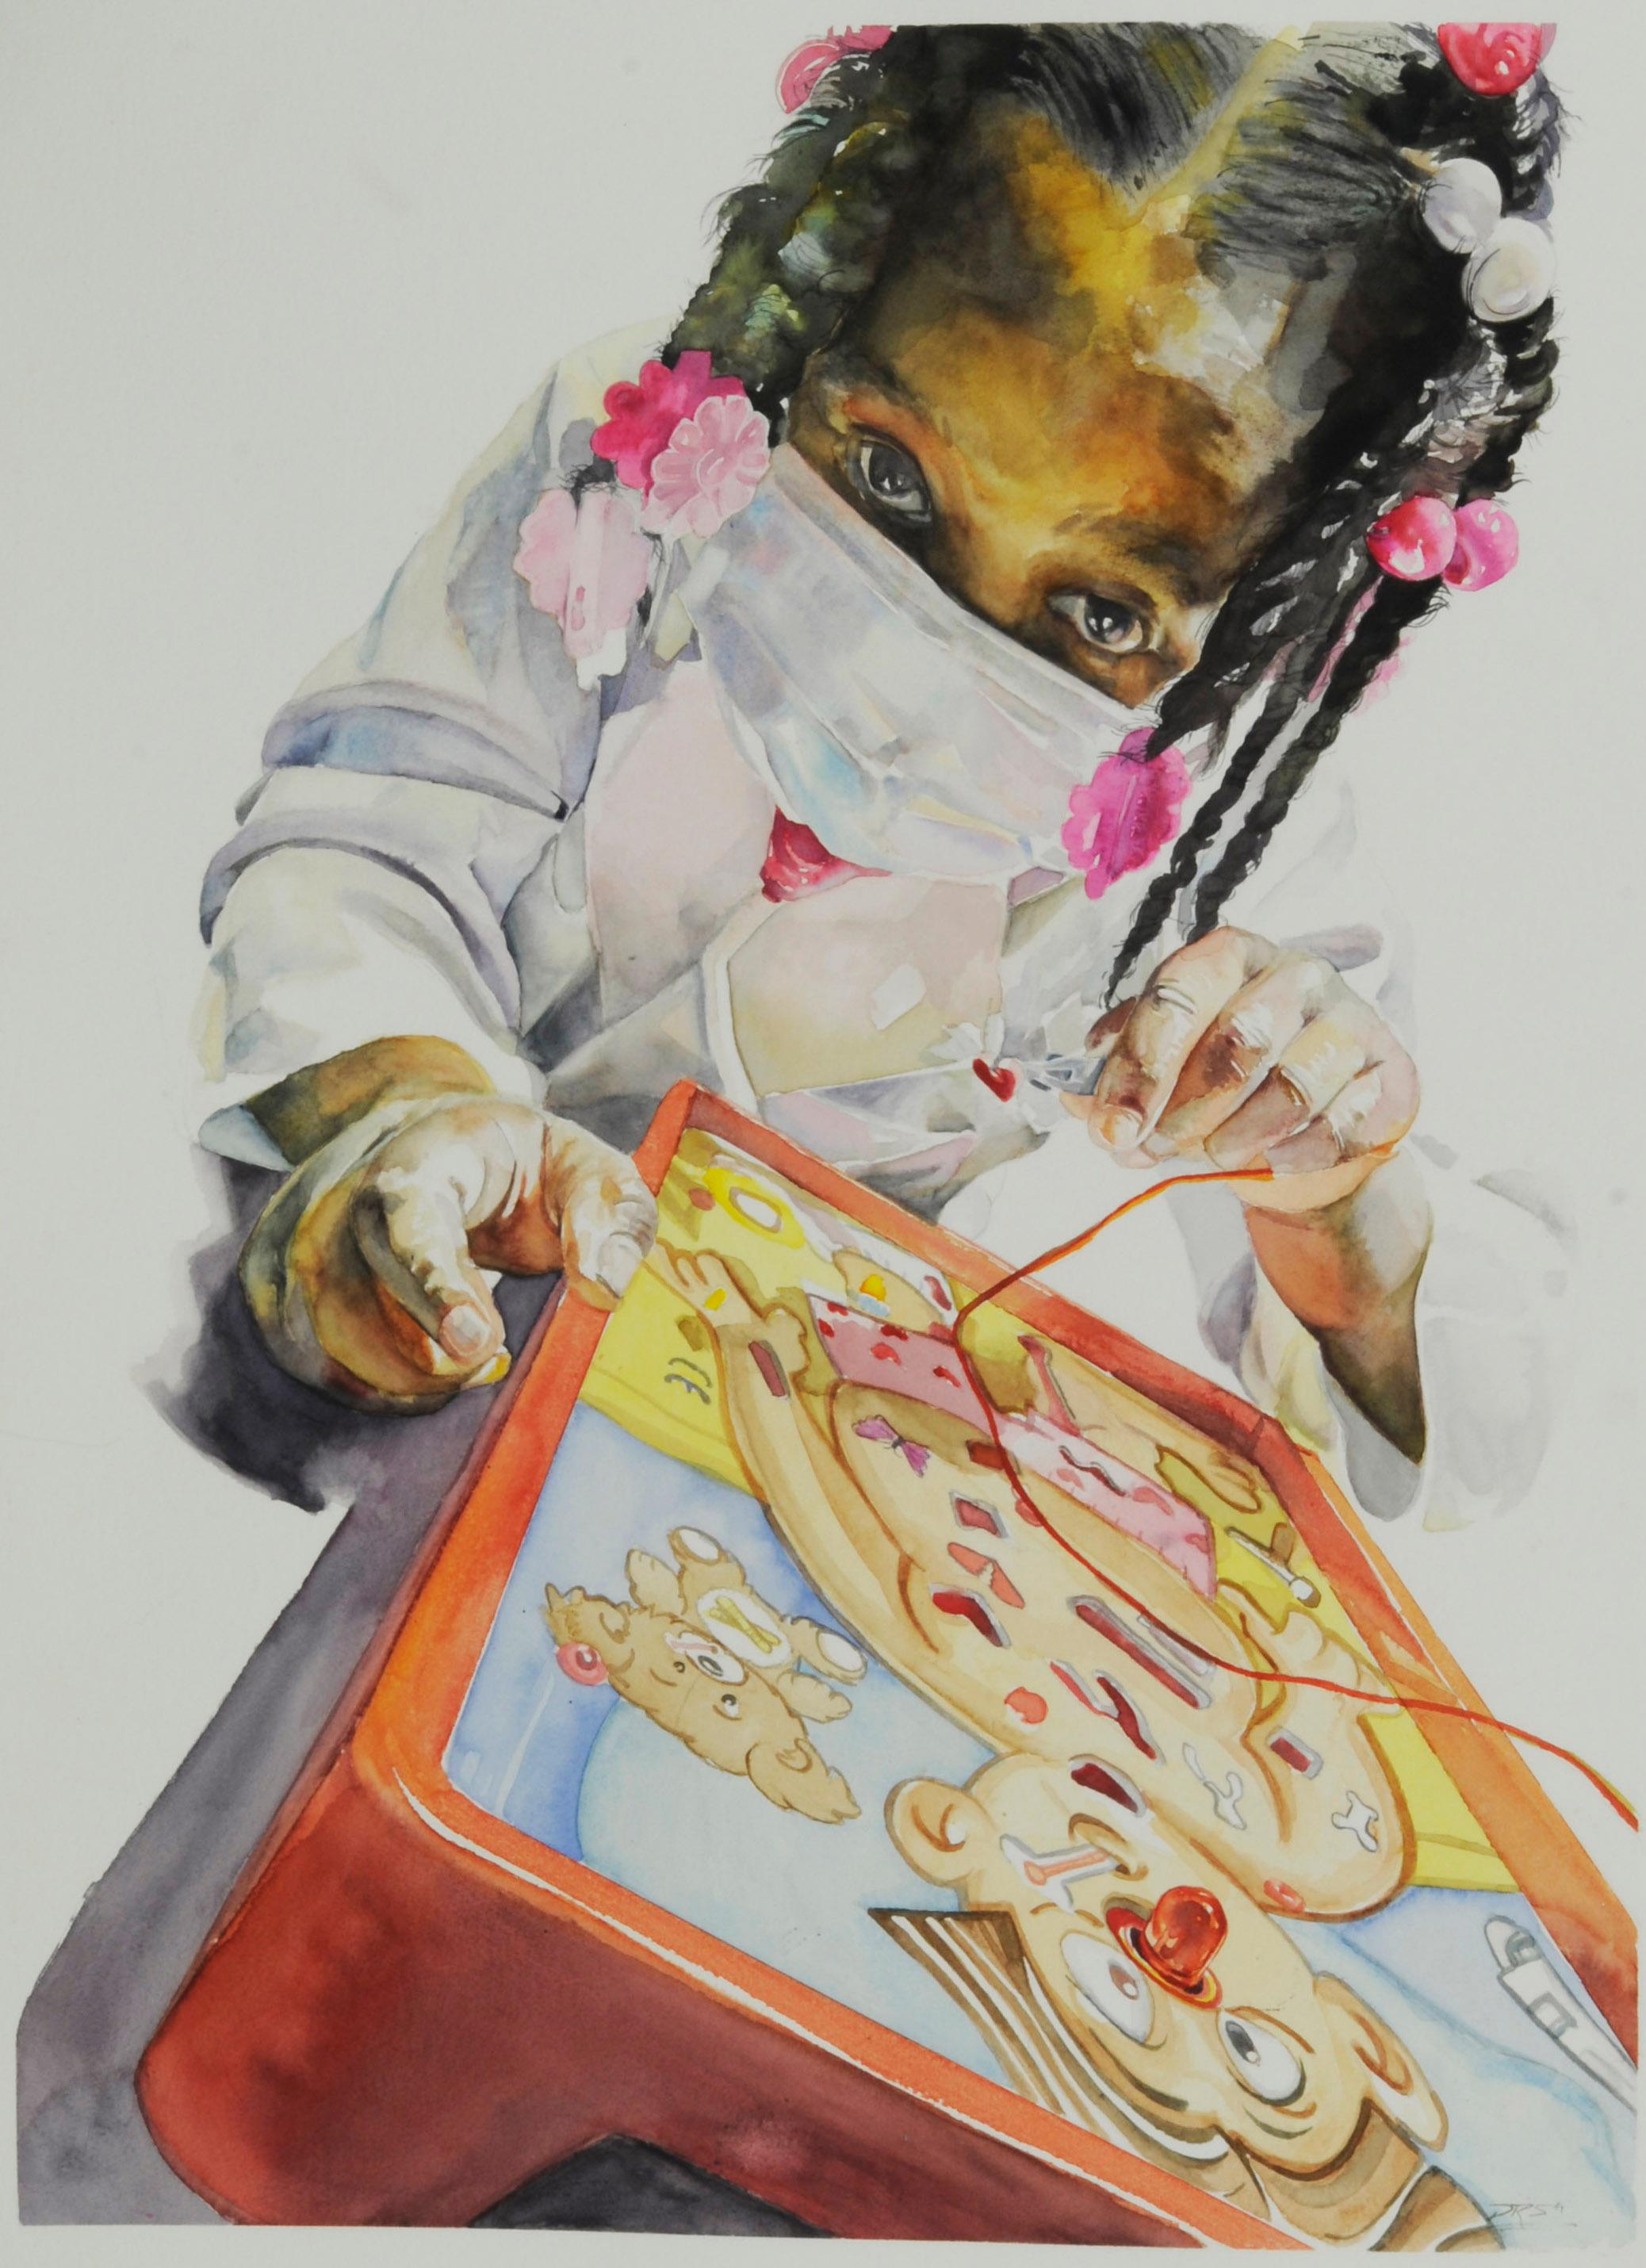 Darius Steward Figurative Art - Playing with Lives (First Responder) 